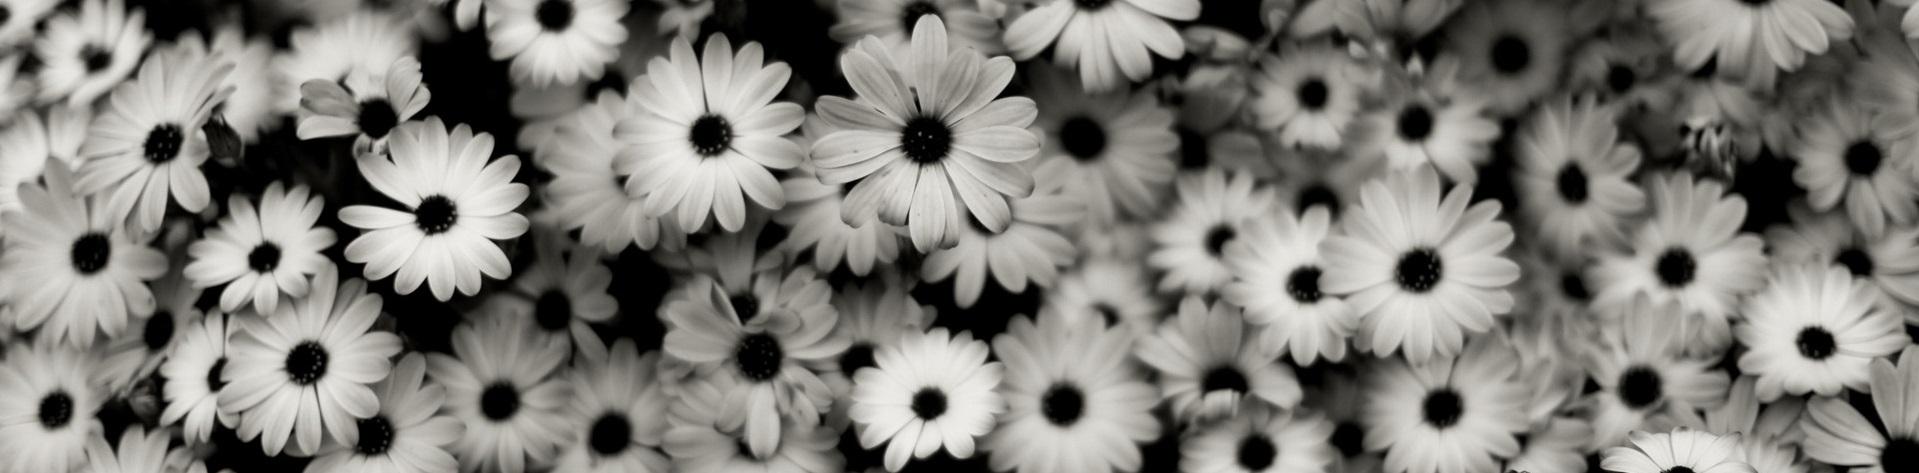 Black And White Flower Wallpaper Image Pictures Becuo